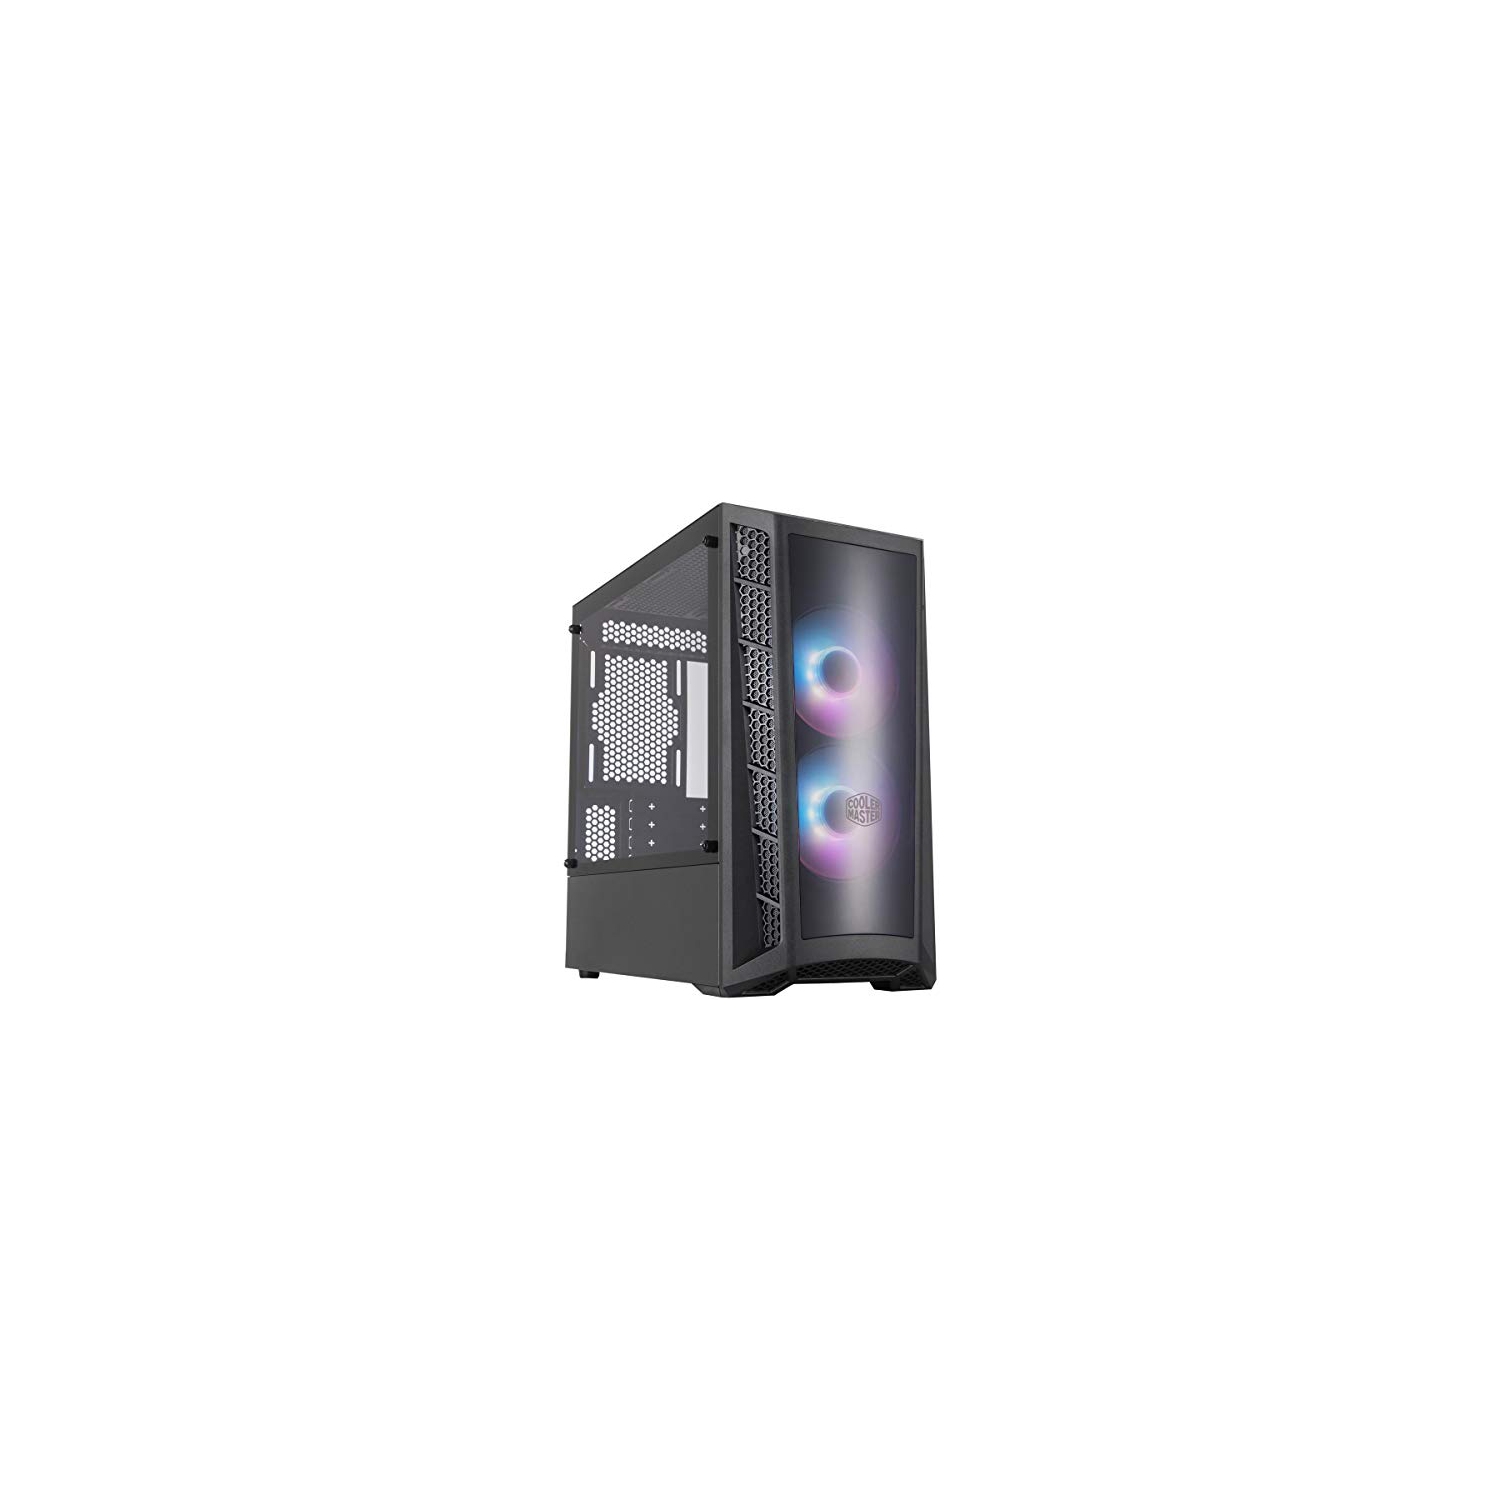 Cooler Master MasterBox MCB-B320L-KGNN-S02 Micro-ATX with Dual ARGB Fans, DarkMirror Front Panel, Mesh Front Intake Vents, ...